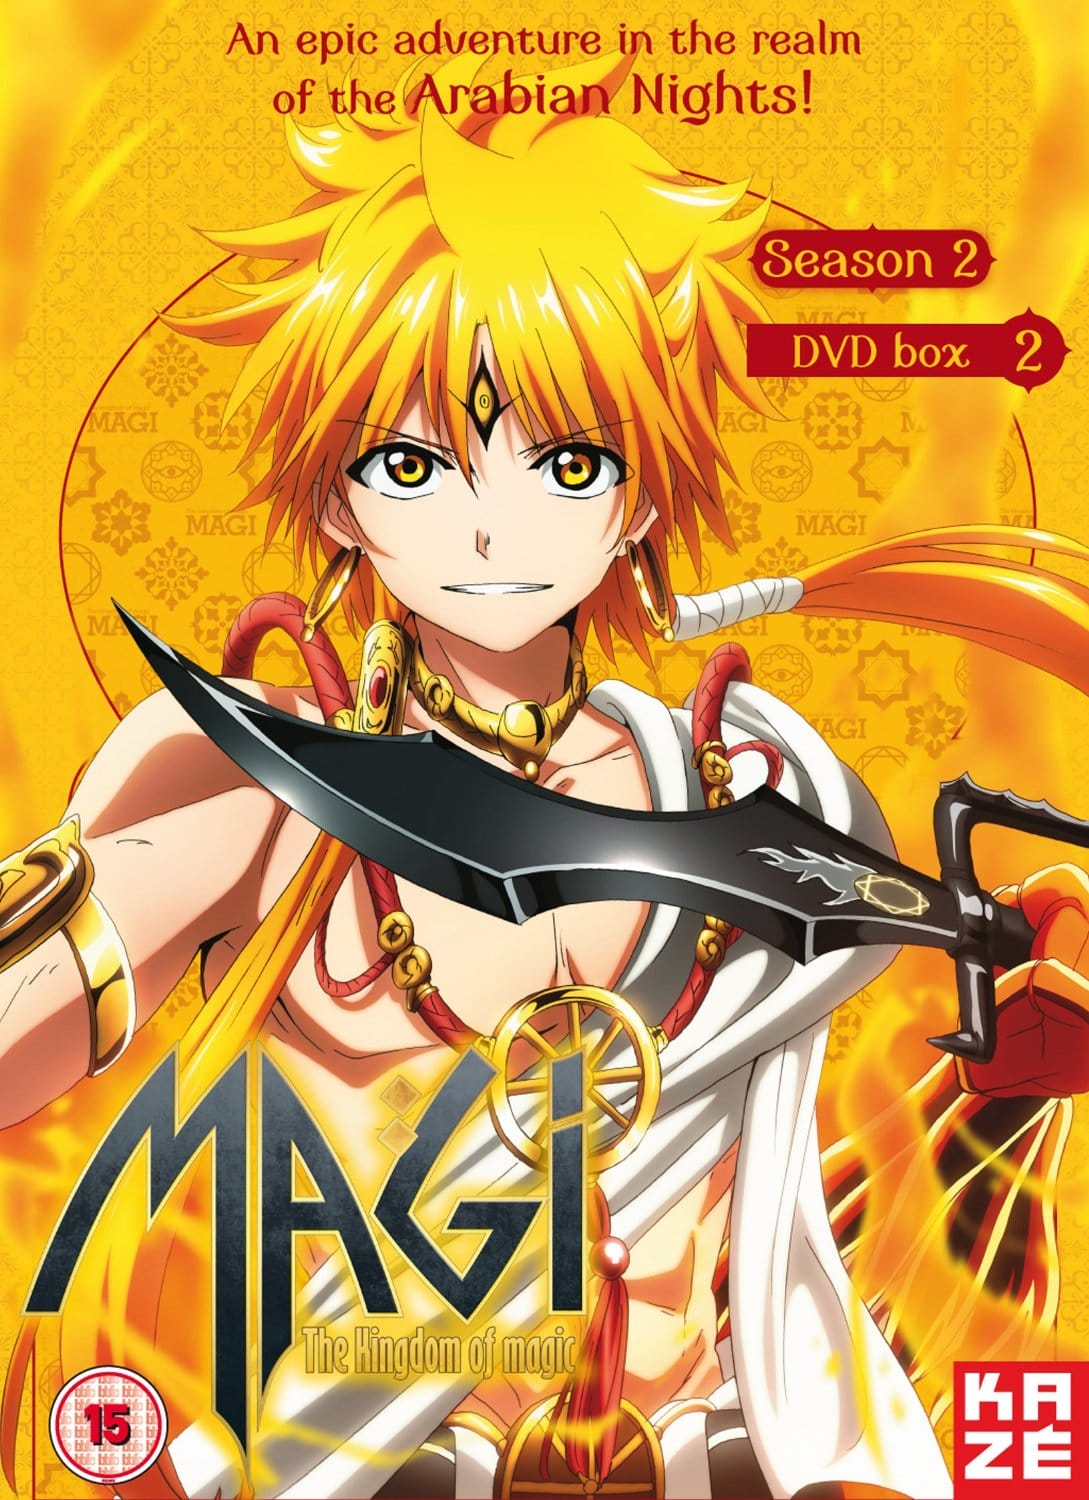 Magi: The Labyrinth of Magic Episode 23 Review - The Approaching Darkness 